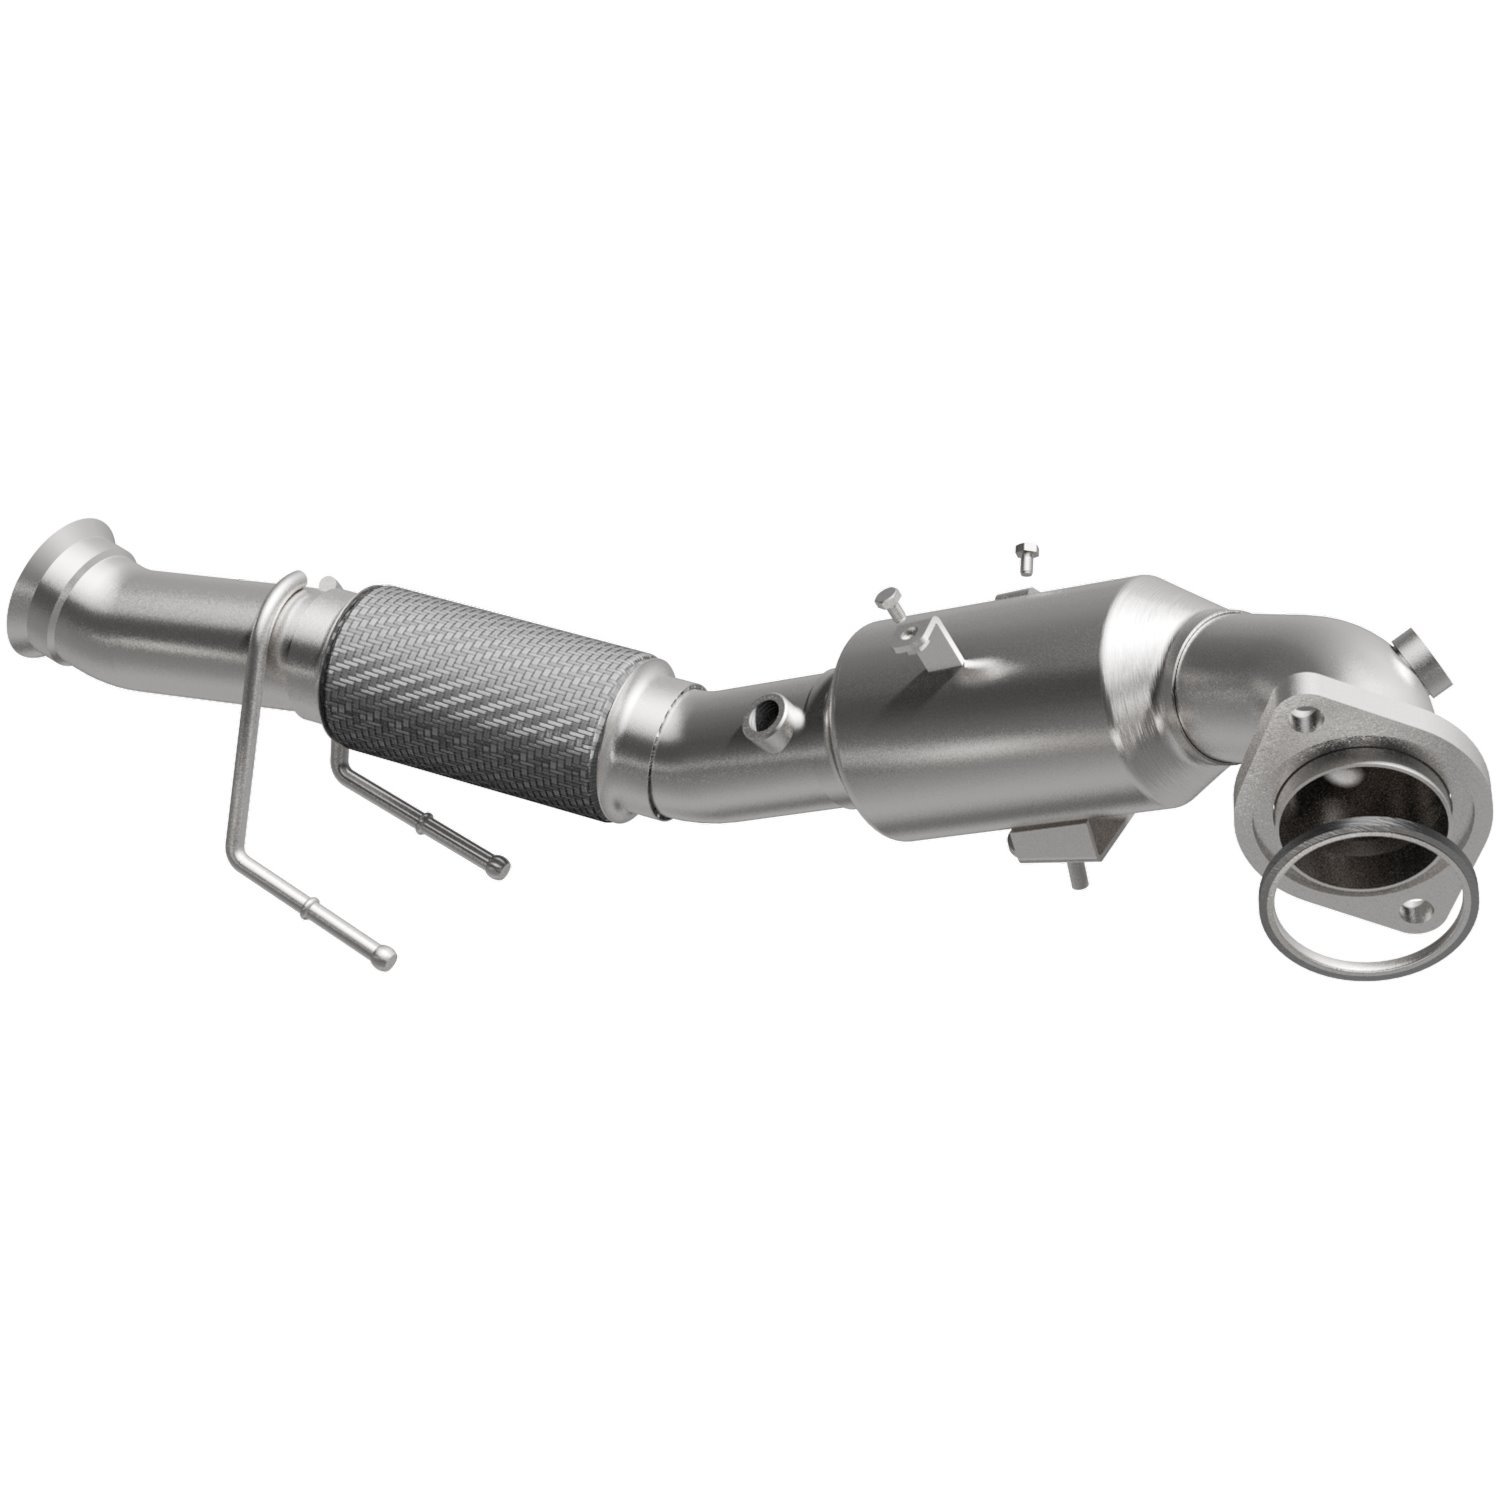 2016-2018 Ford Focus OEM Grade Federal / EPA Compliant Direct-Fit Catalytic Converter 21-427